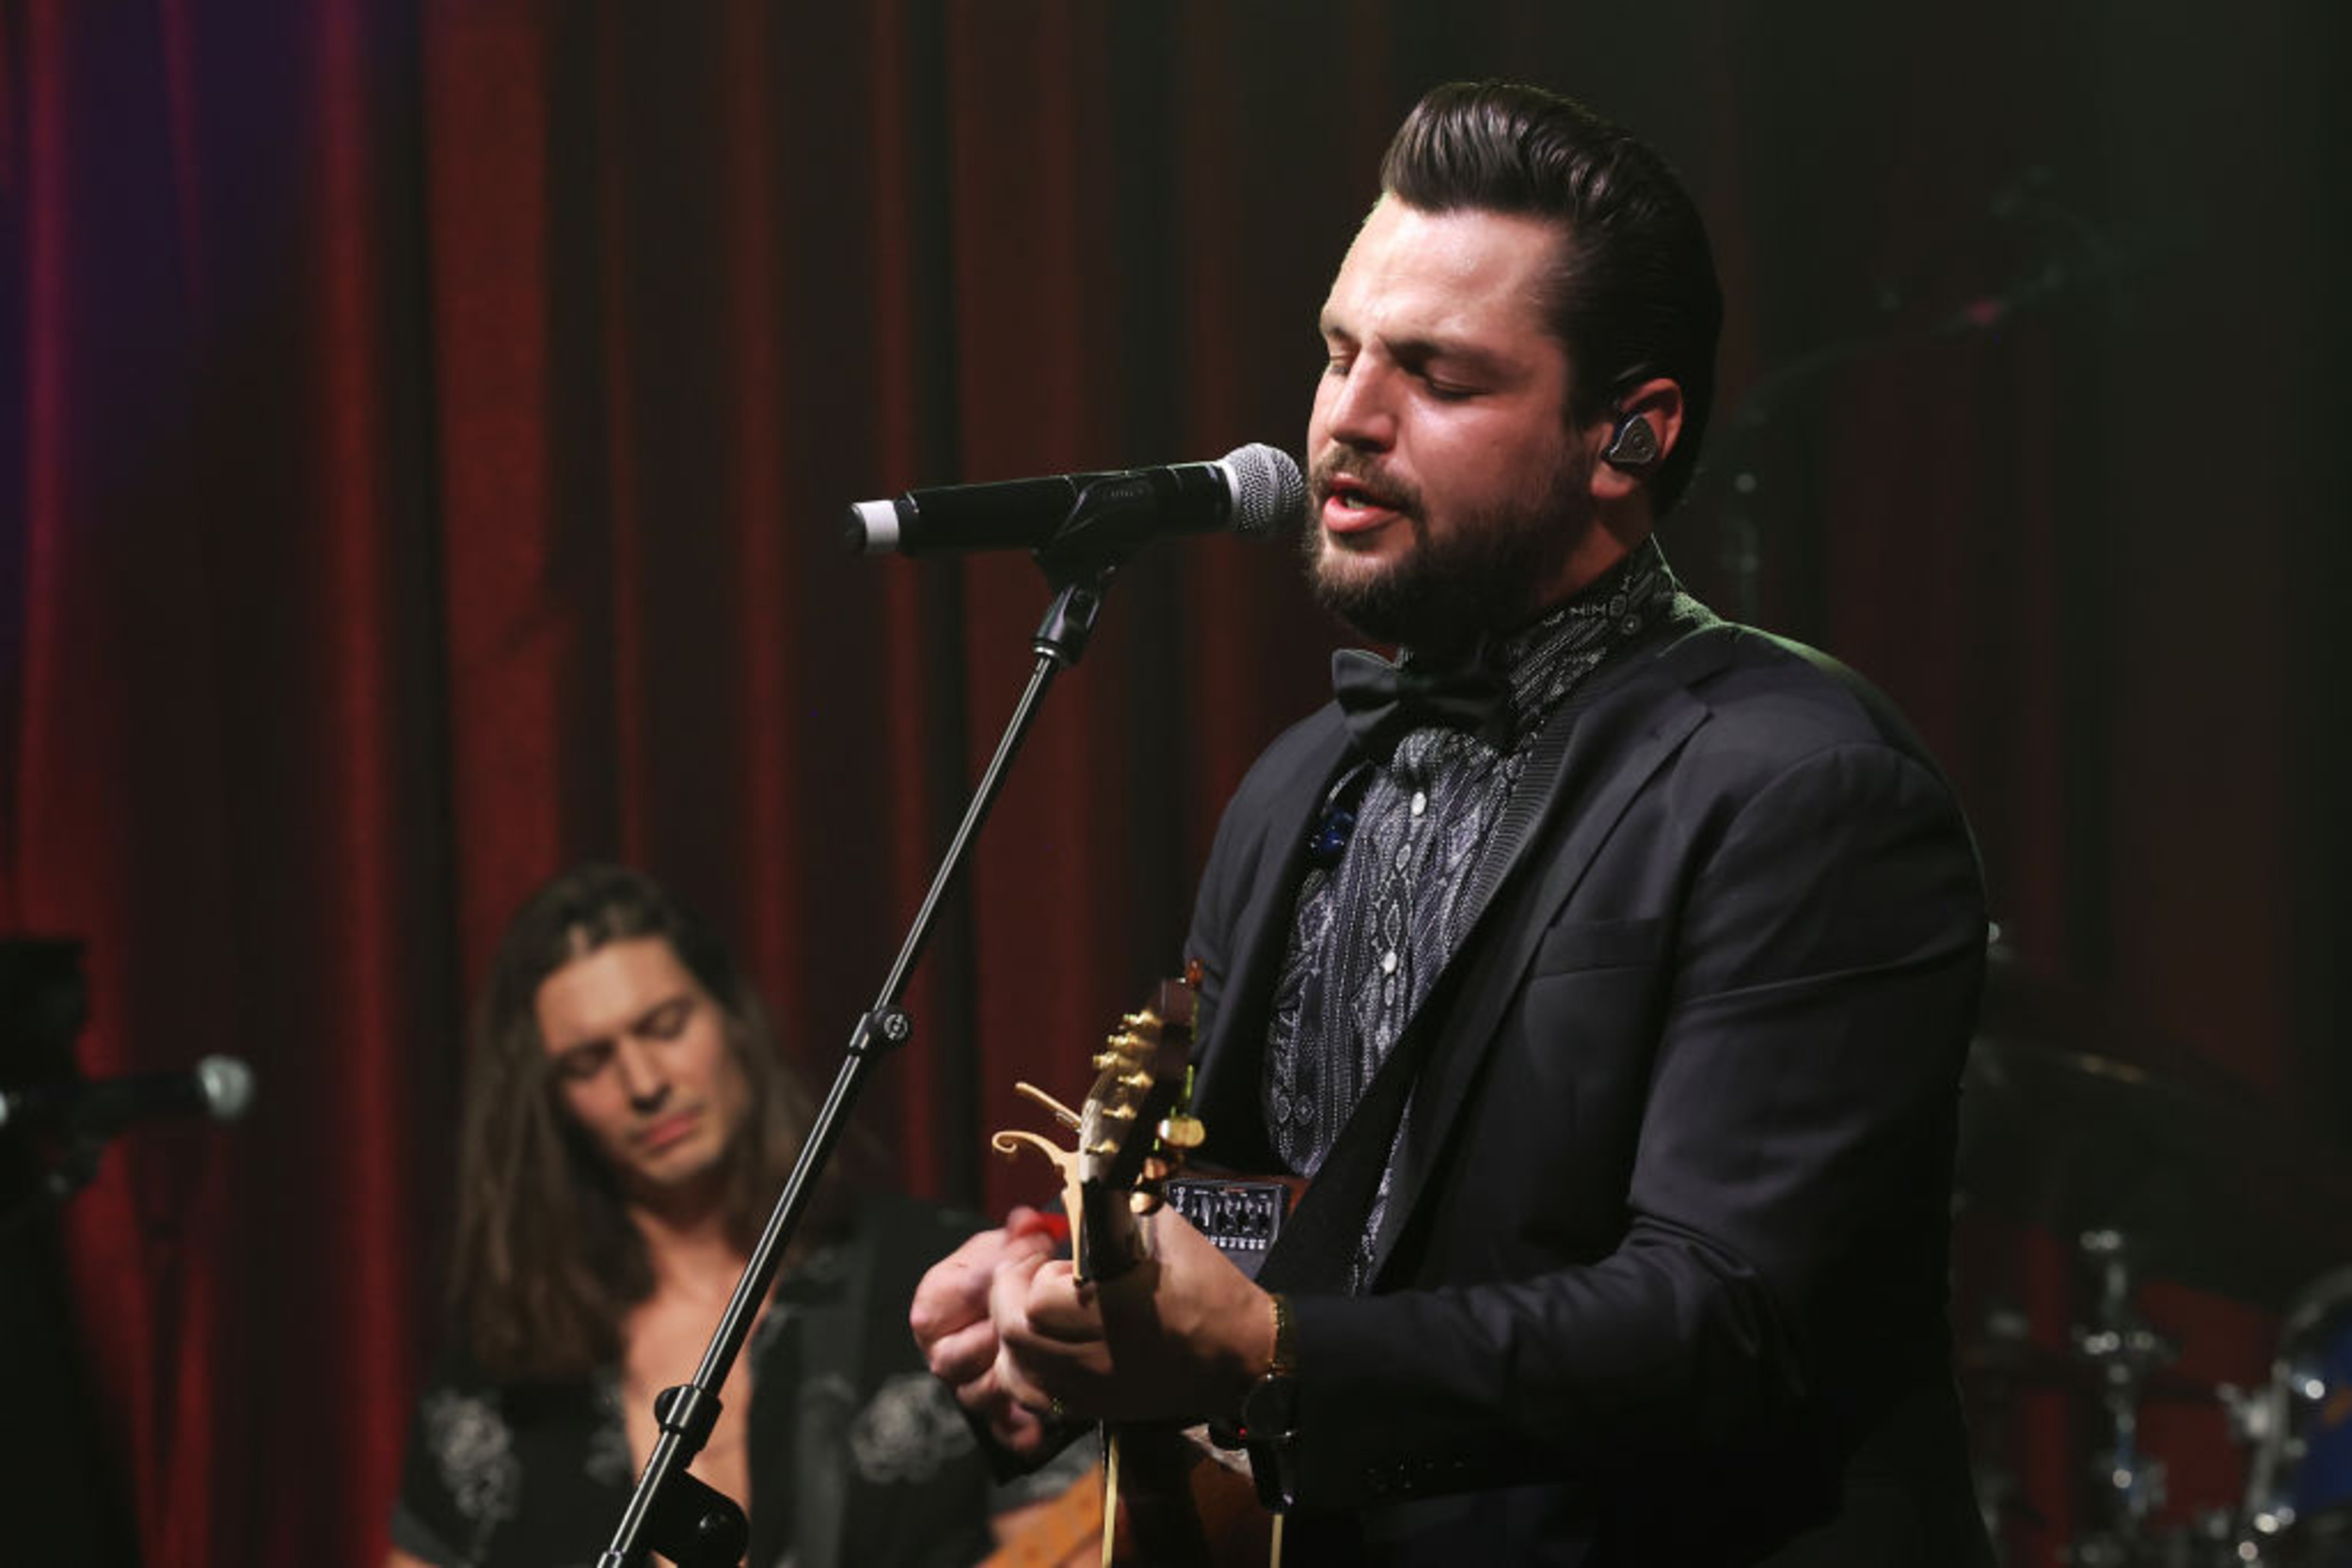 <p>The winner of the nineteenth season of "American Idol," Chayce Beckham has already scored a Platinum hit with 2021's "23," but he's not stopping there. In 2023, Beckham returned with a great new single, "Til The Day I Die," and he's headed out on tour with Luke Bryan in 2024. </p><p>You may also like: <a href='https://www.yardbarker.com/entertainment/articles/guitar_gods_the_30_most_influential_lead_guitarists_of_all_time_040824/s1__27984020'>Guitar gods: The 30 most influential lead guitarists of all time</a></p>